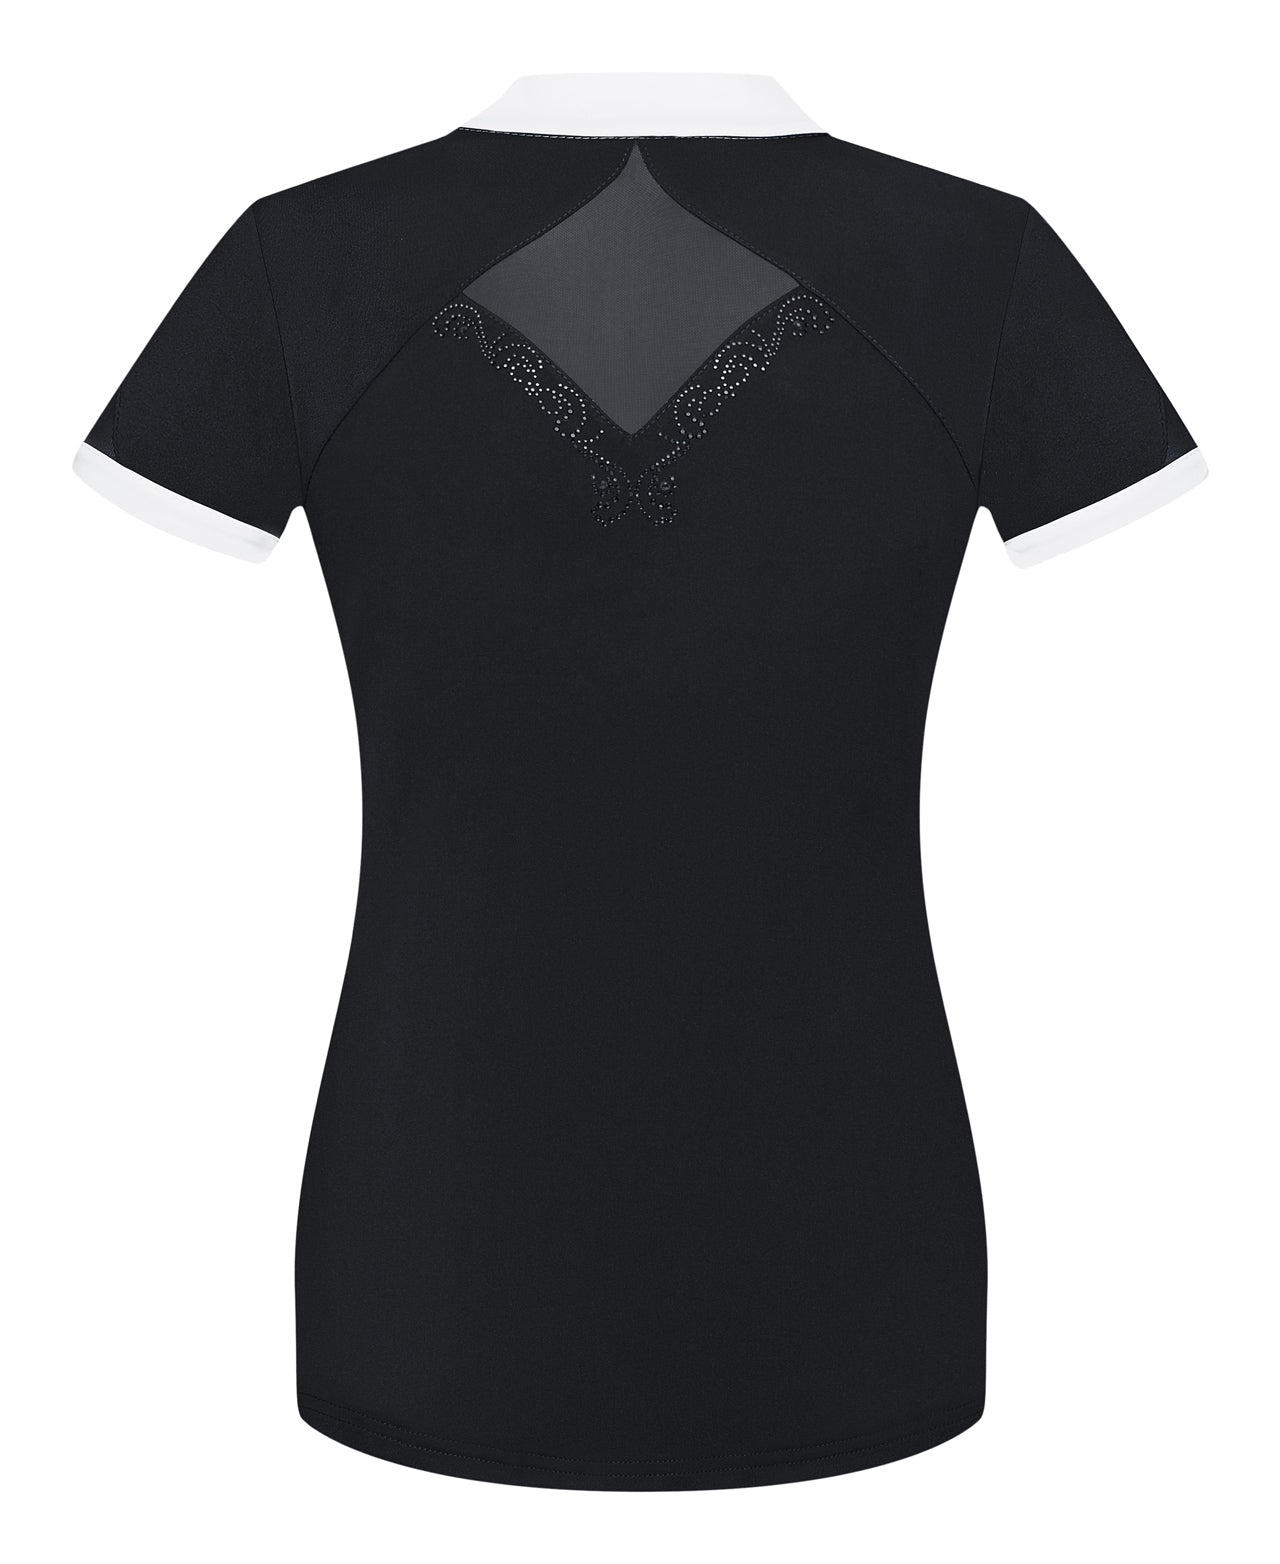 White and black show shirt for ladies